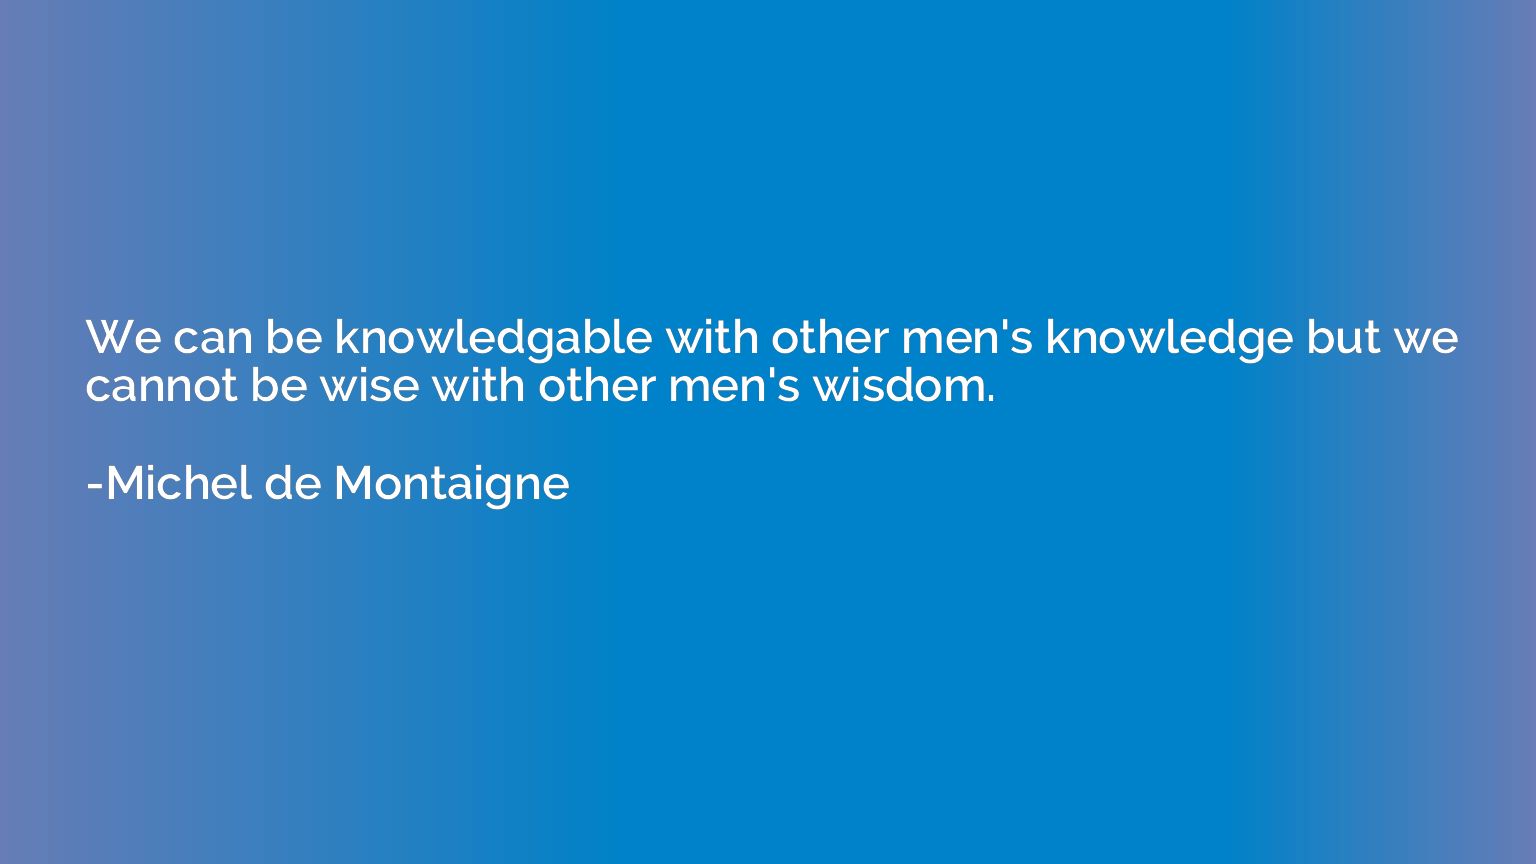 We can be knowledgable with other men's knowledge but we can